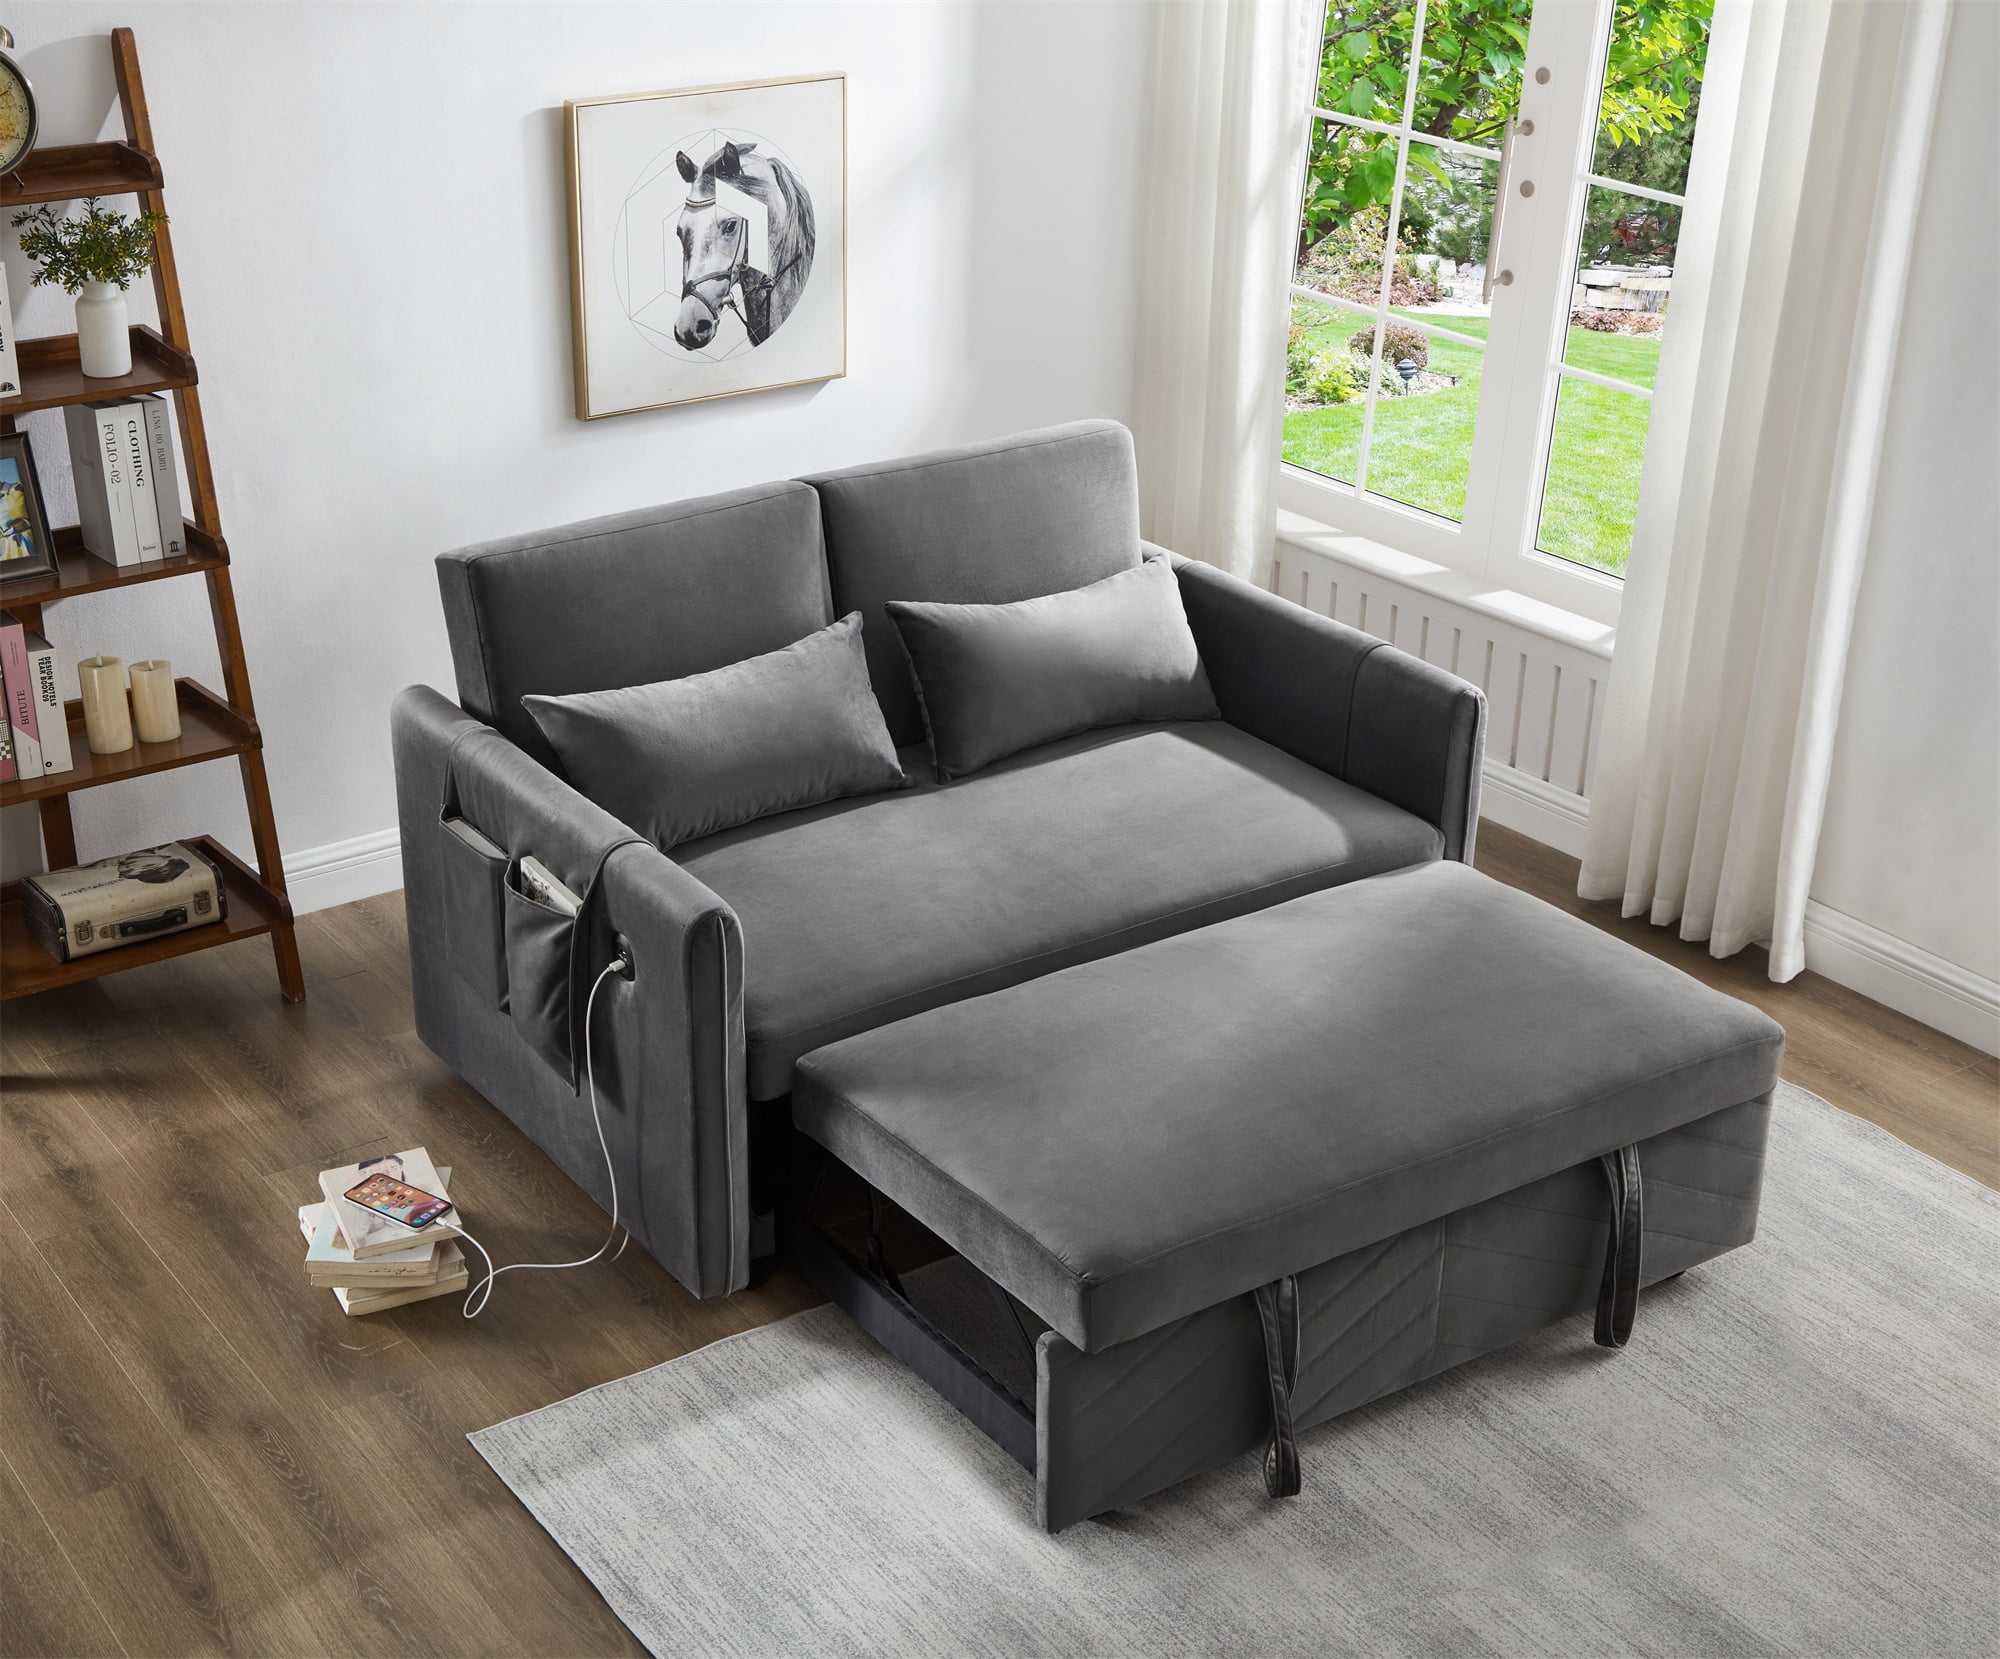 Gexpusm Upholstered Sleeper Sofa Pull Out Bed, Convertible Loveseat ...